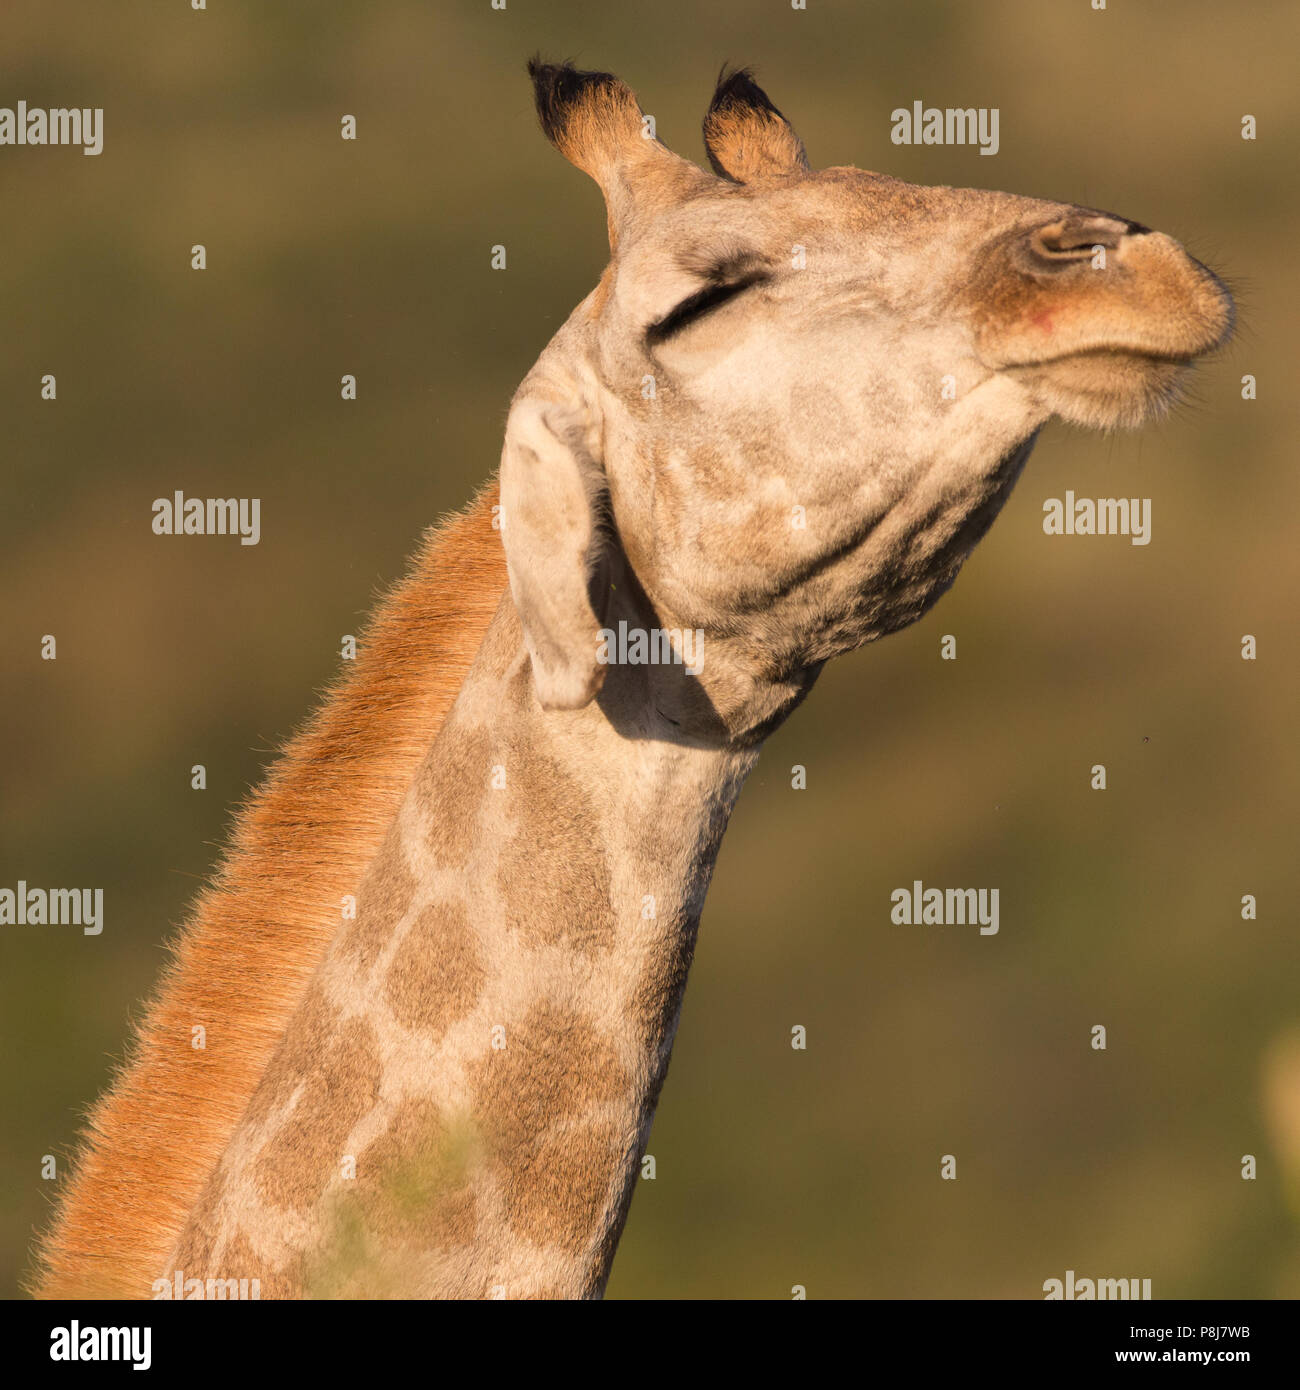 Square image and closeup face of South African or Cape Giraffe (G.g. giraffa) shaking head with eyes closed in Pilanesberg national park, South Africa Stock Photo